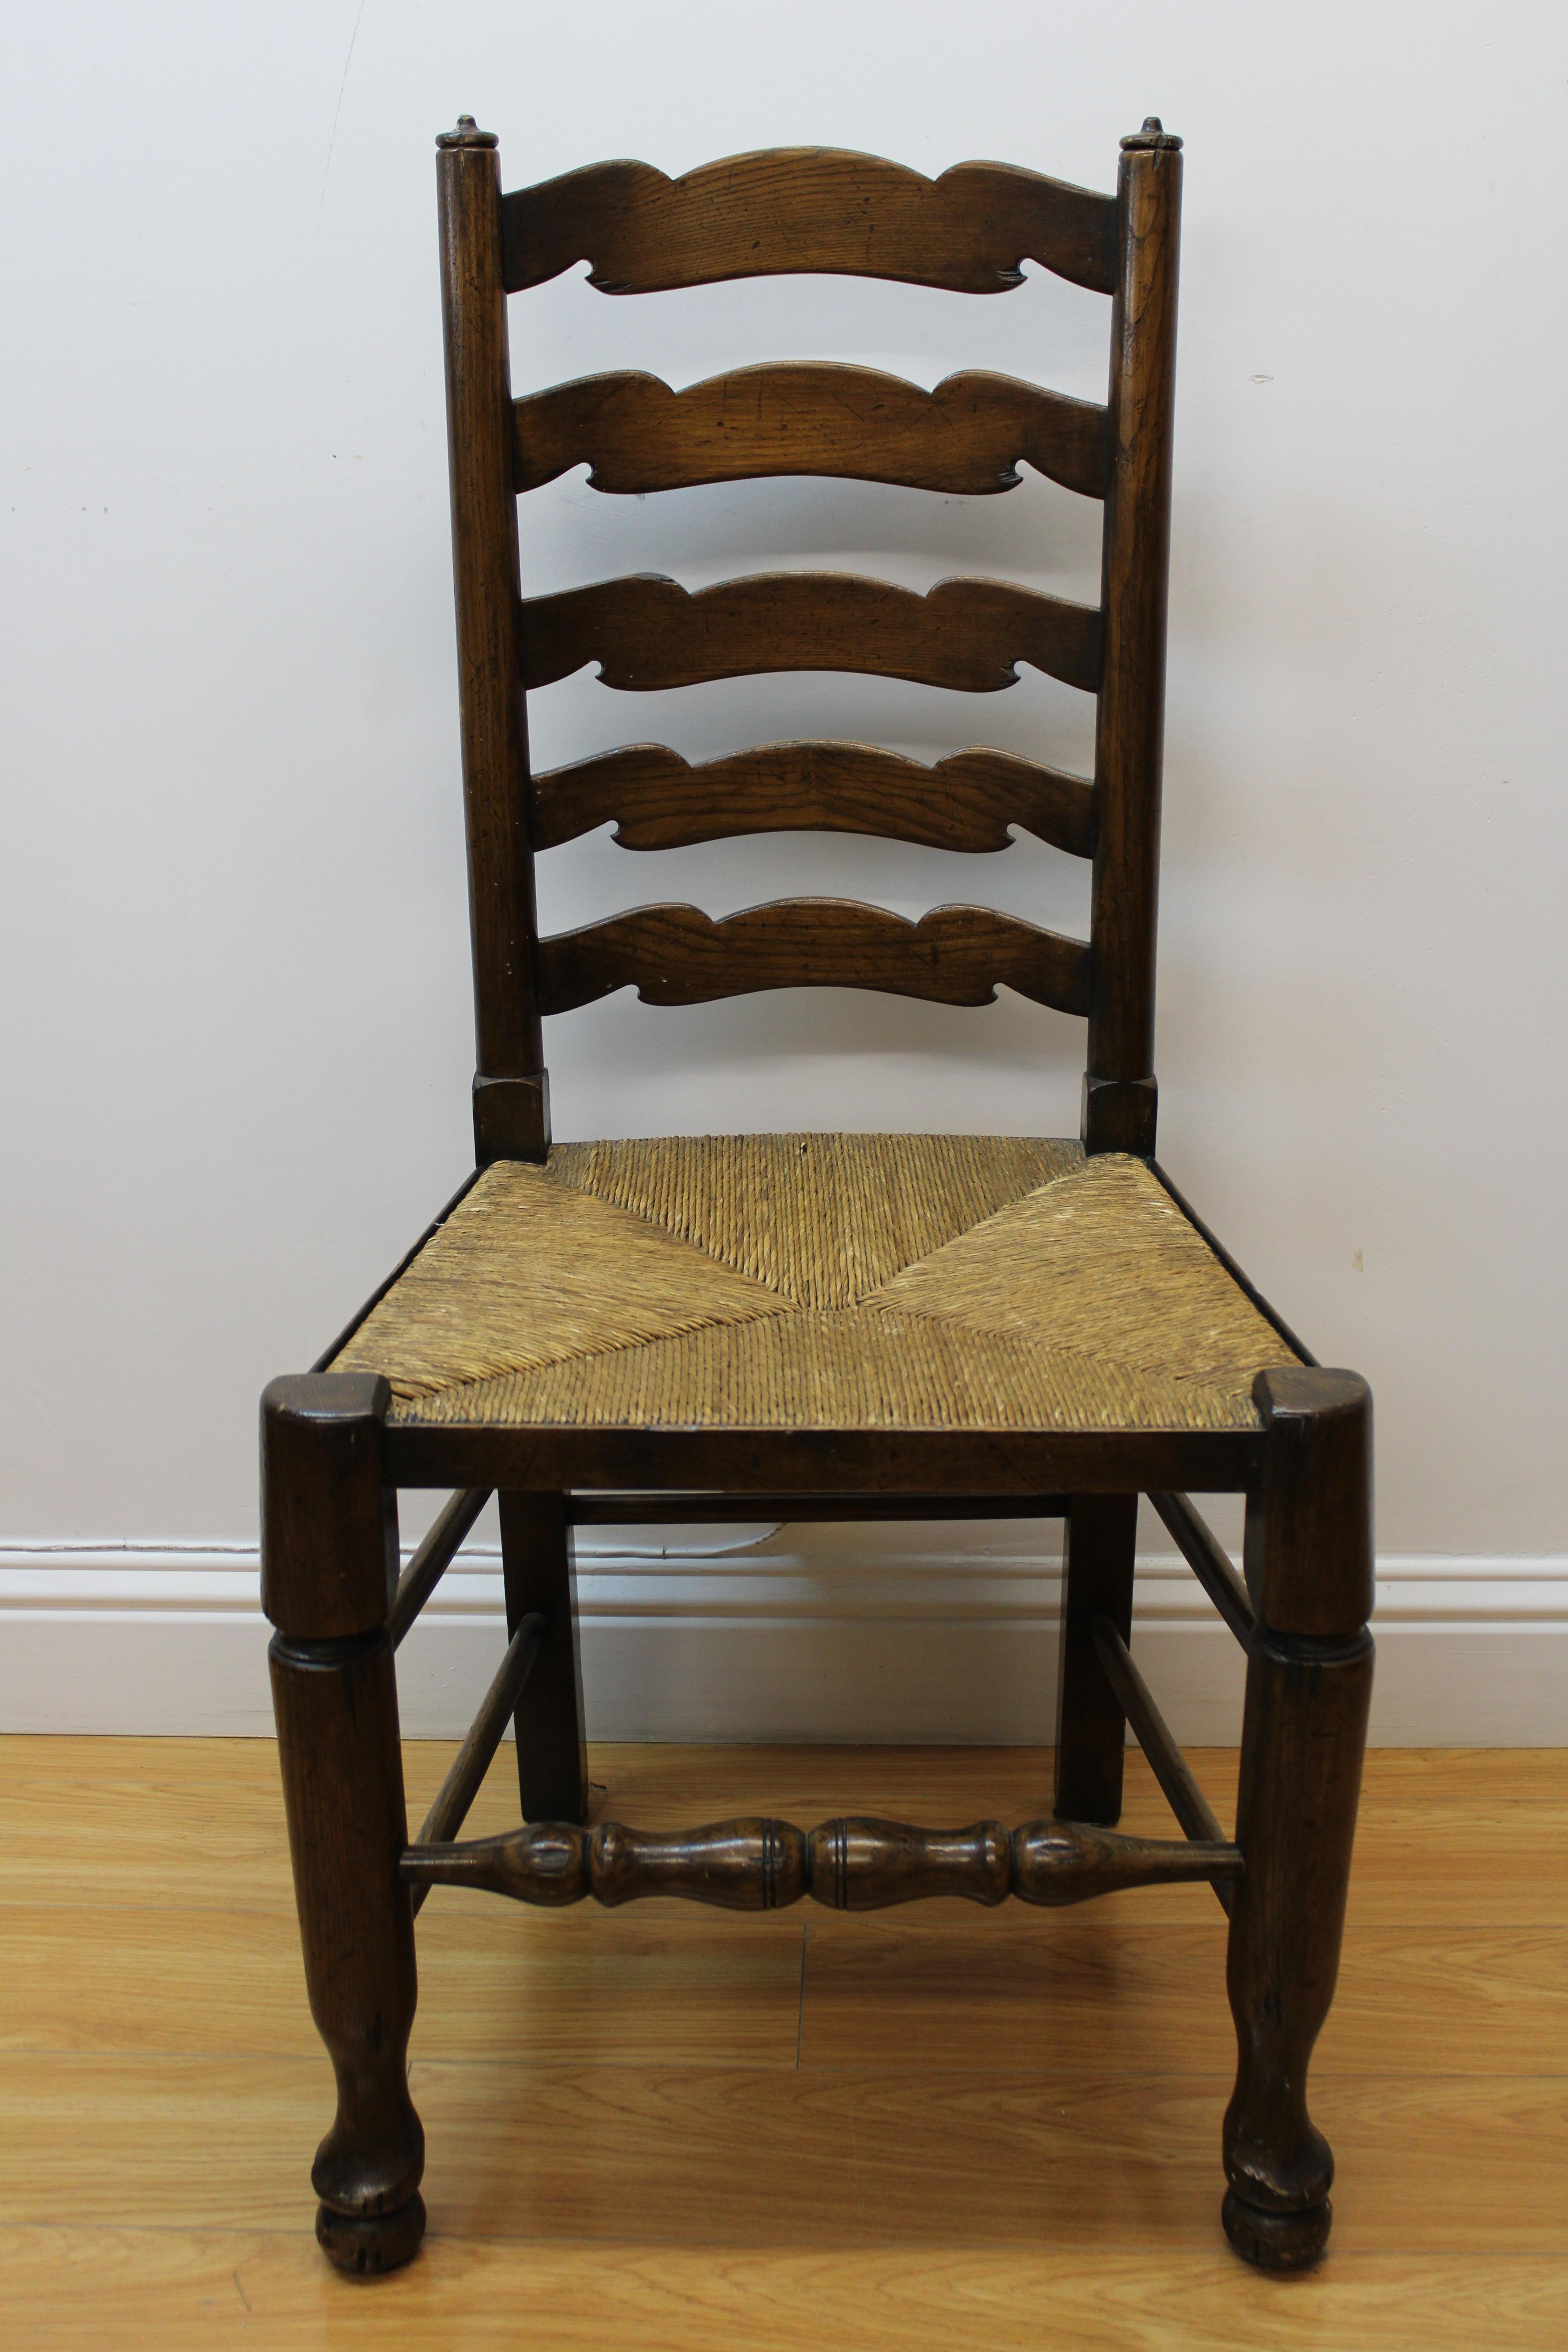 C. 19th Century

Set of 4 European wood ladderback chairs w/ woven seats 

1 of the Seats has Minor Bottom side Damage but you can still use the Chair & Sit.